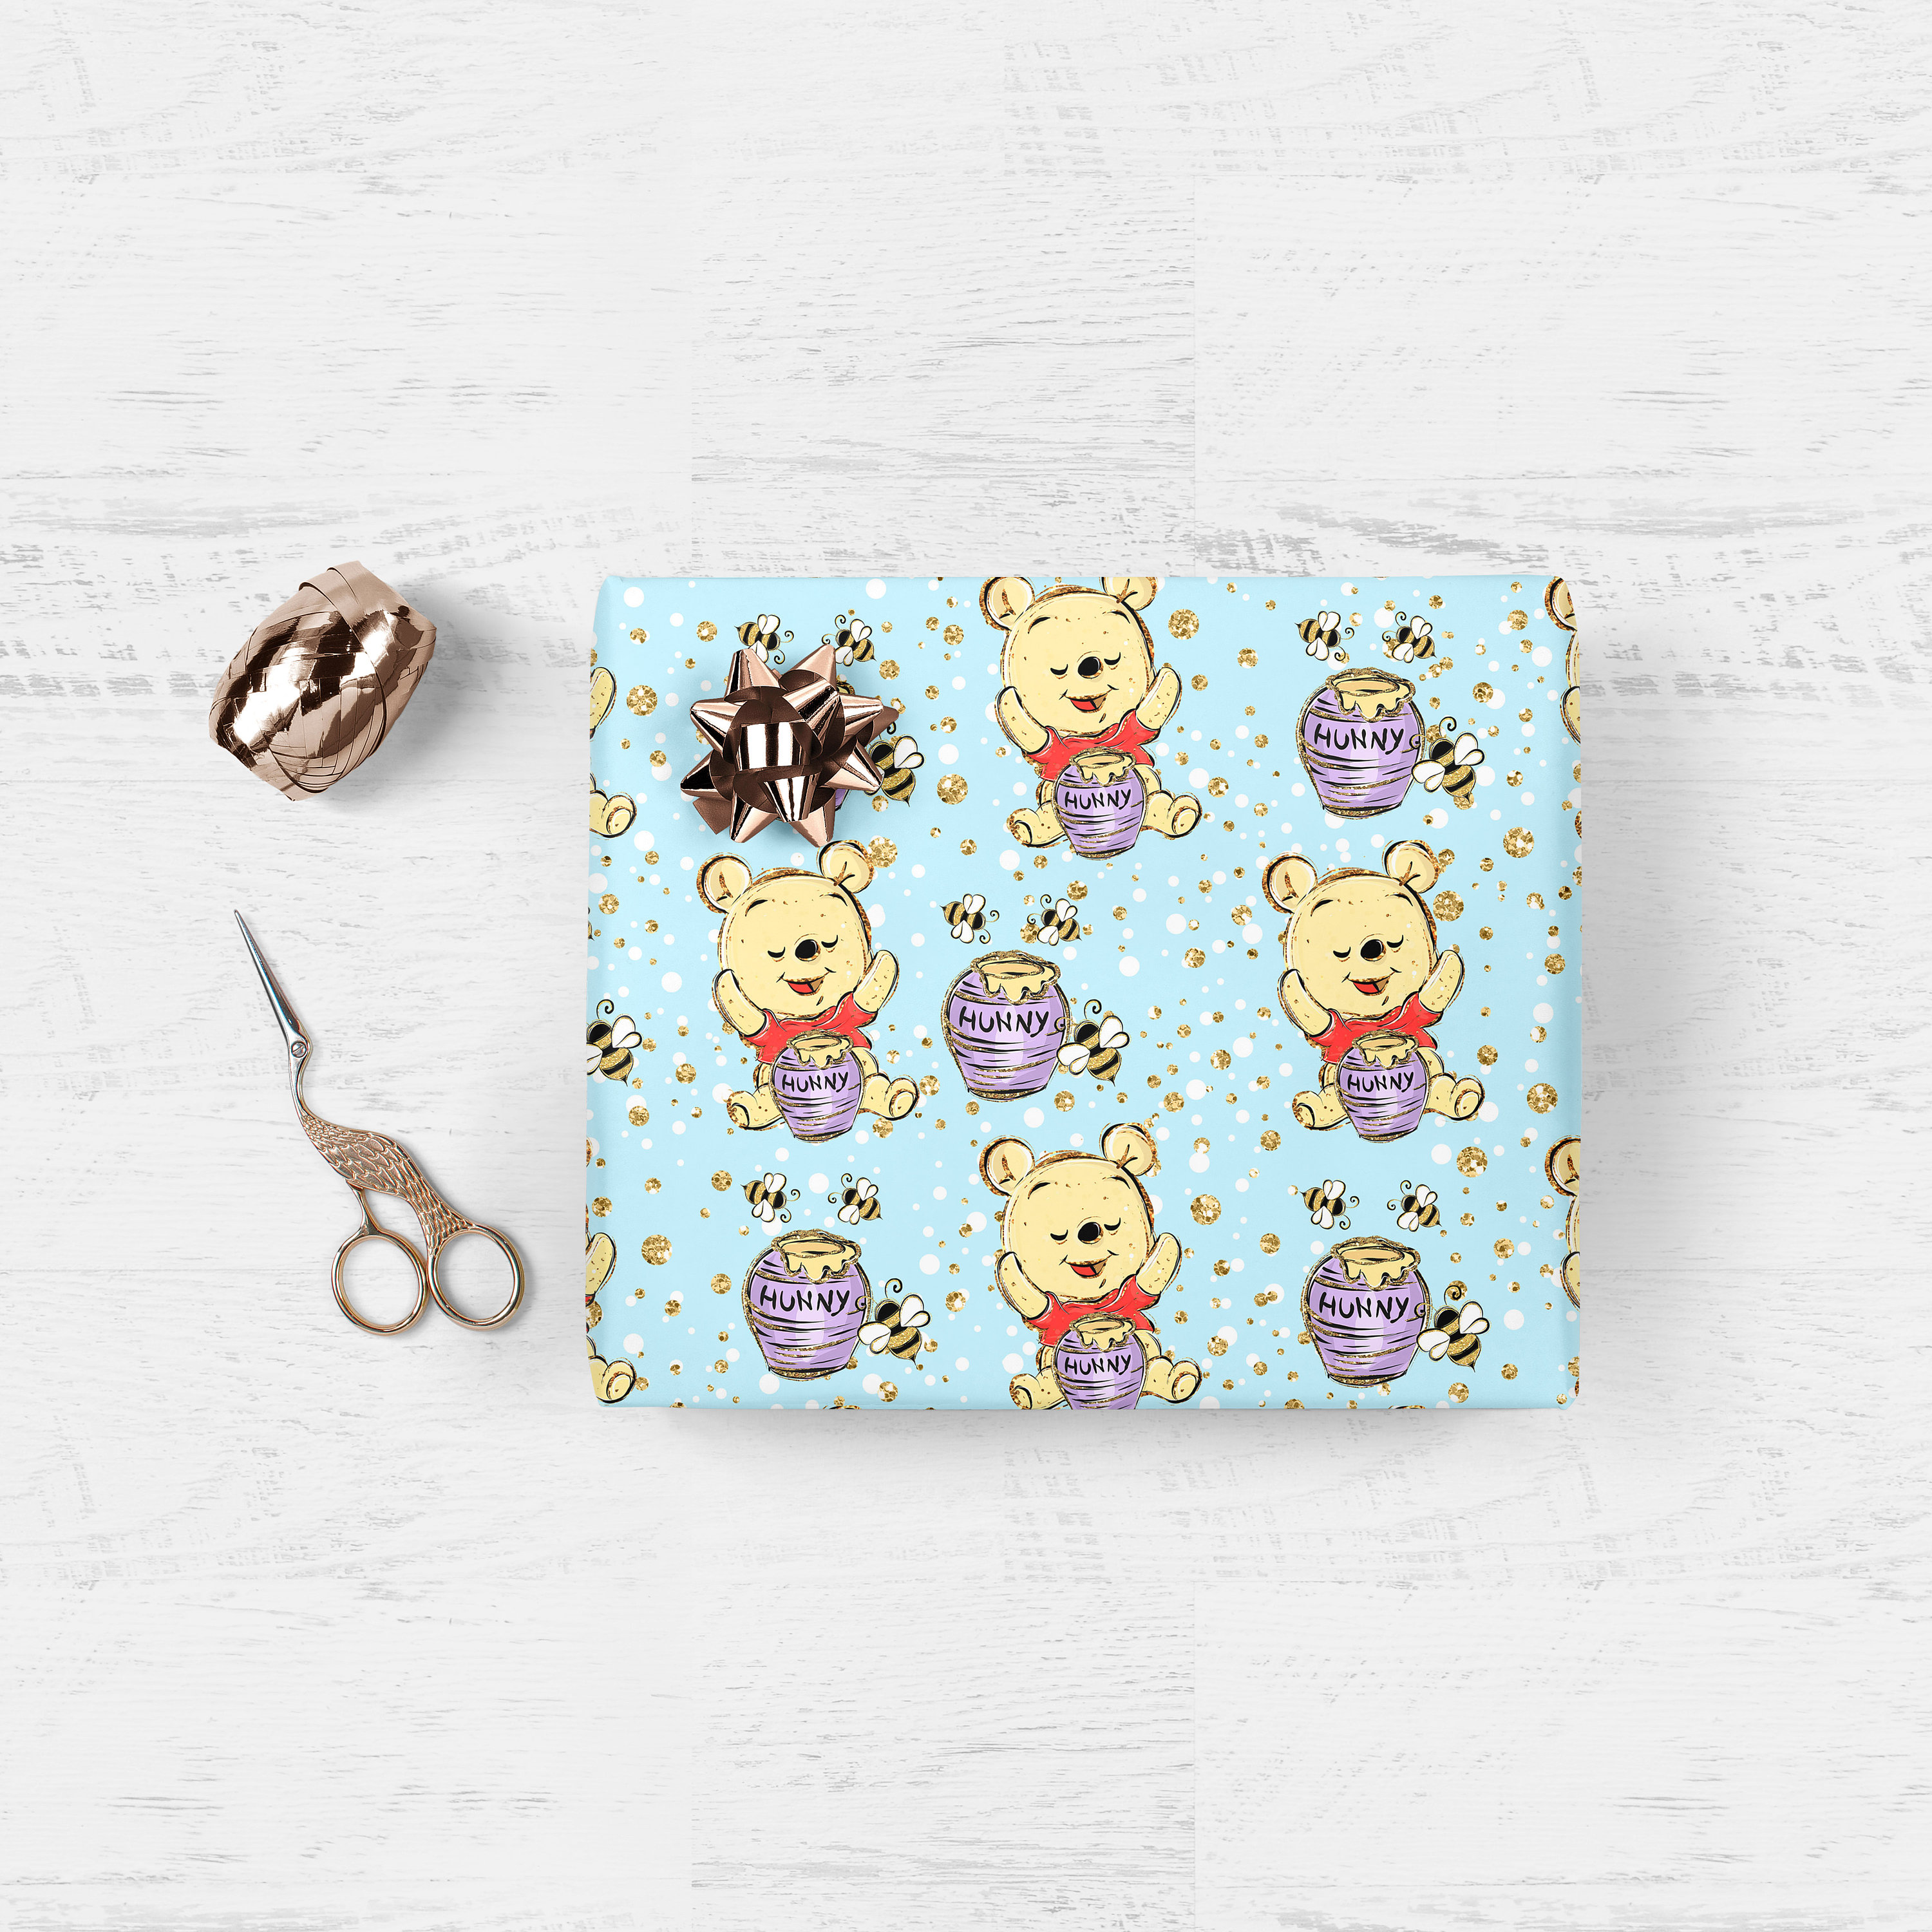 Winnie the Pooh Wrapping Paper (Inc 2 Sheets & 2 Tags)